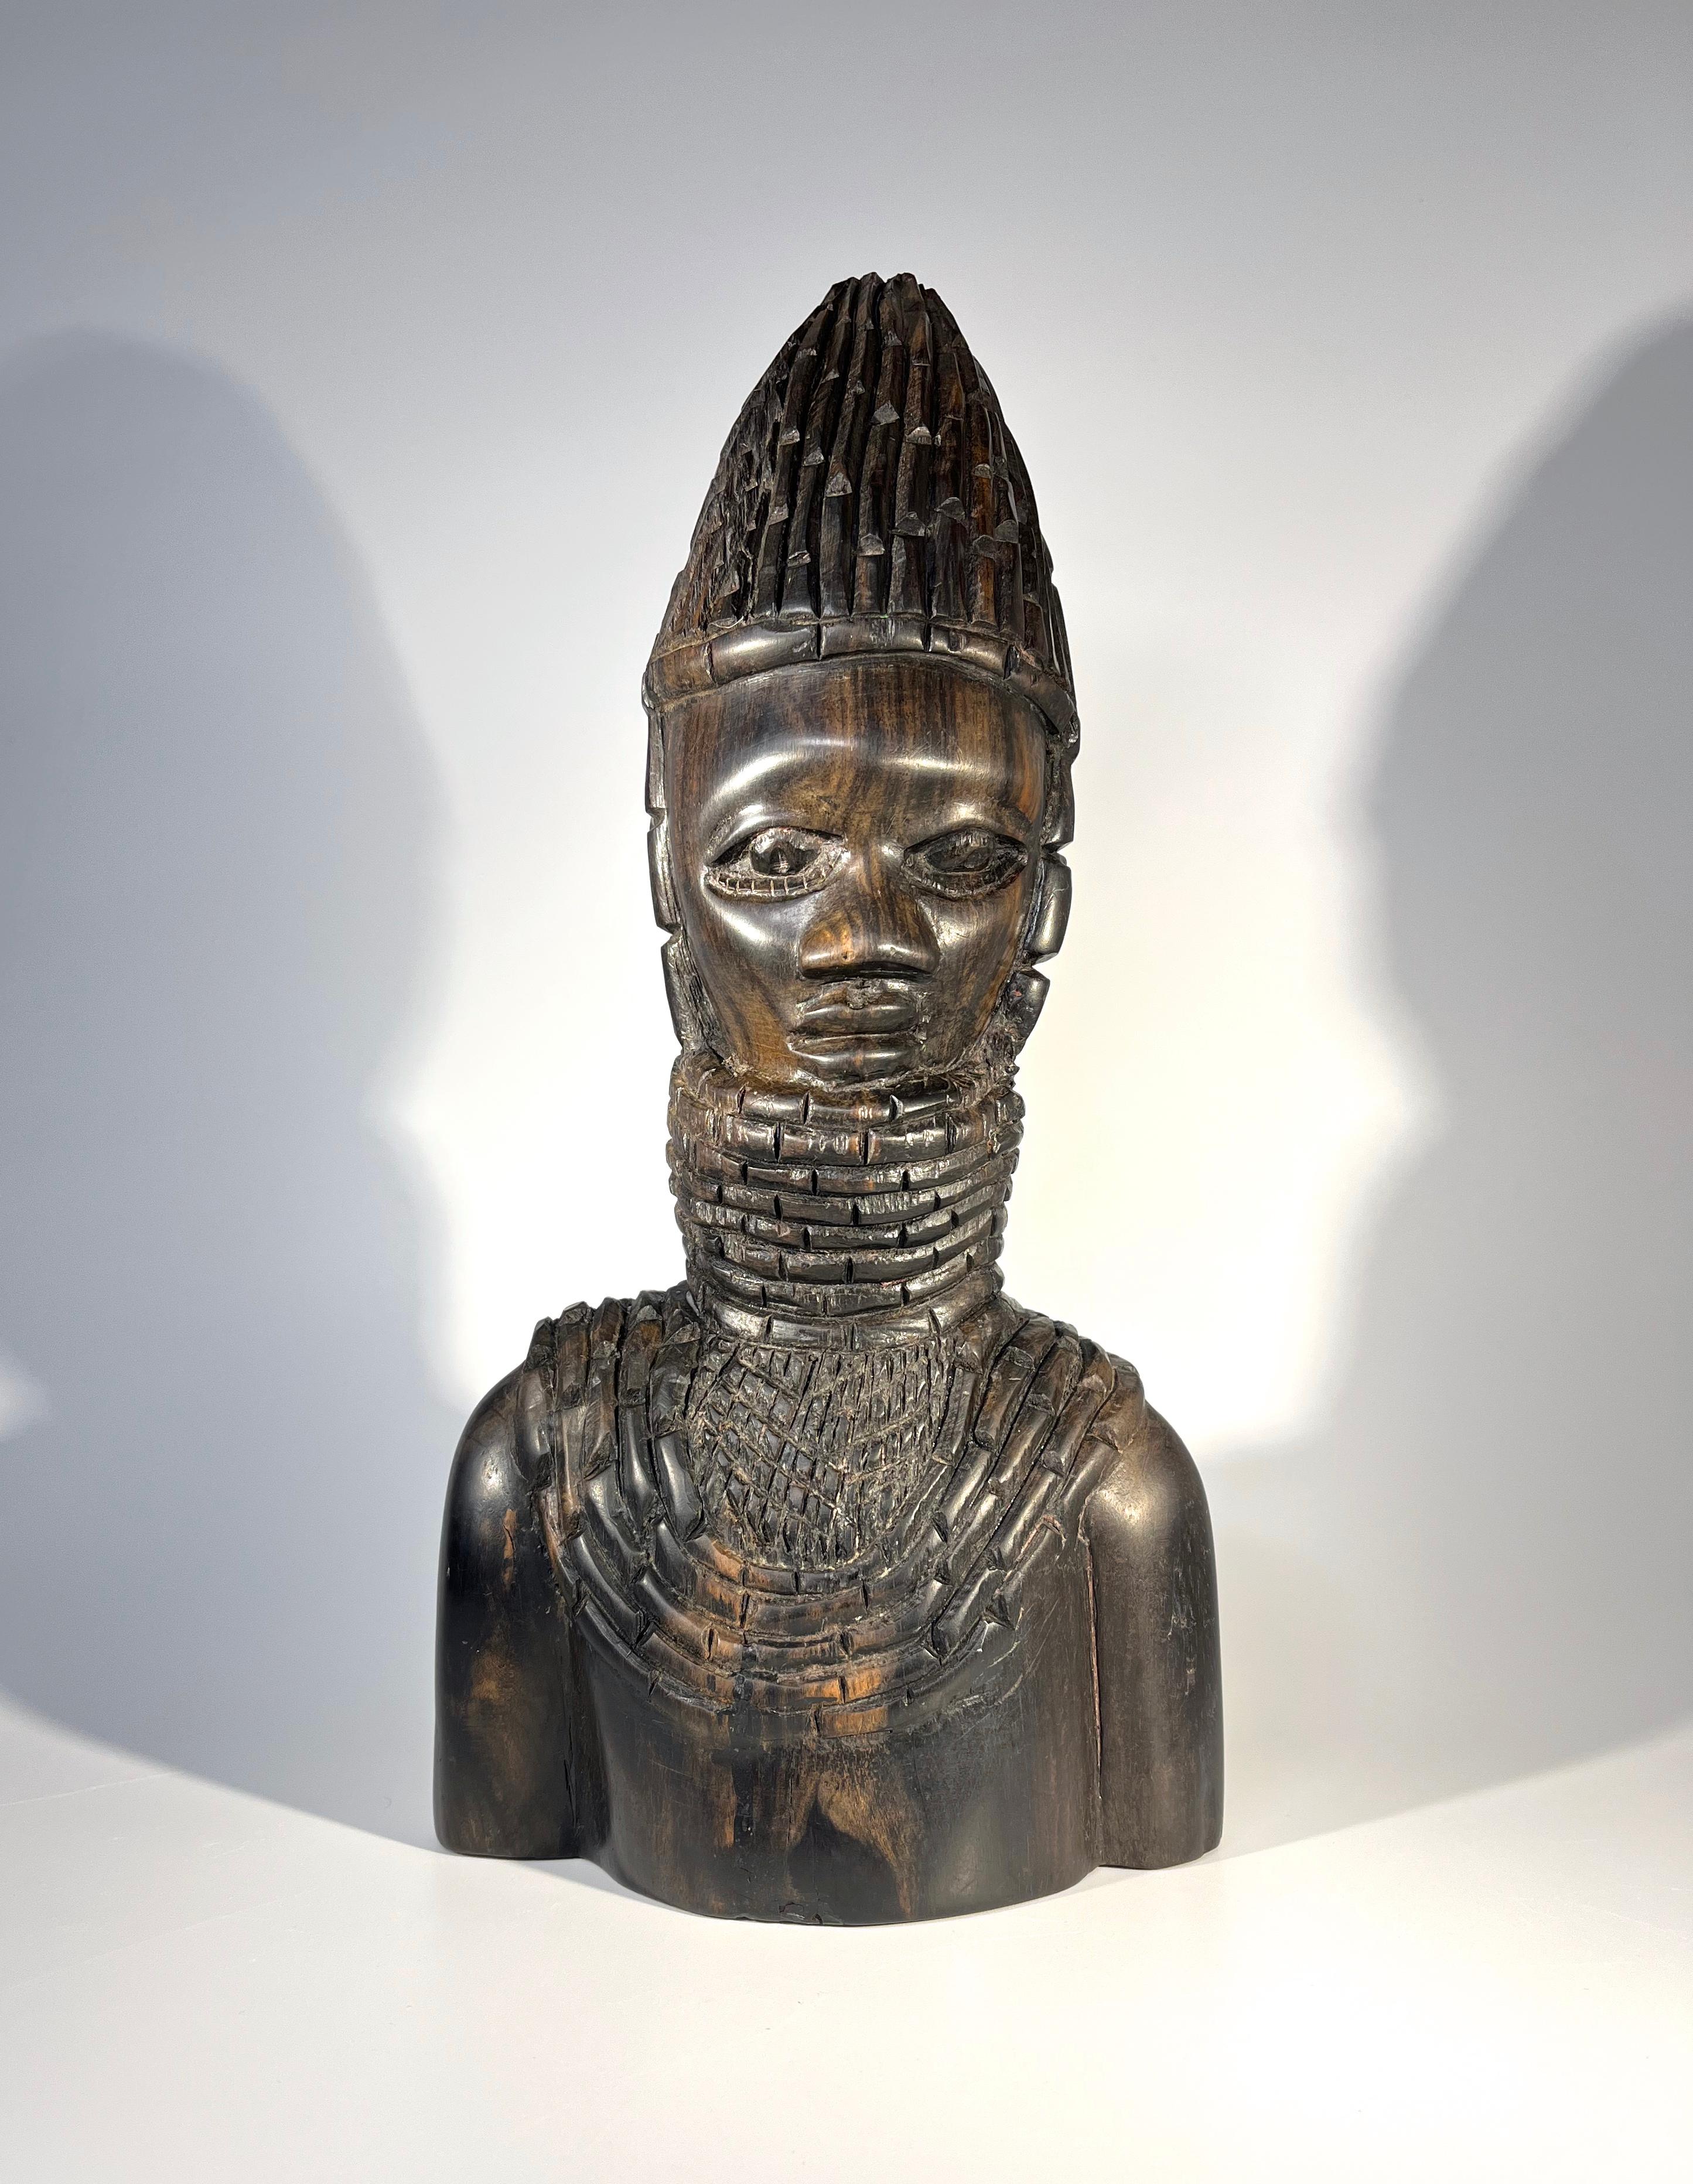 Hand carved ebony hardwood bust of a young Benin warrior
Traditionally carved Benin artistry
Circa 1970
Height 10.75 inch, Width 5.5 inch, Depth 2.75 inch
Very good condition
Wear consistent with age and use